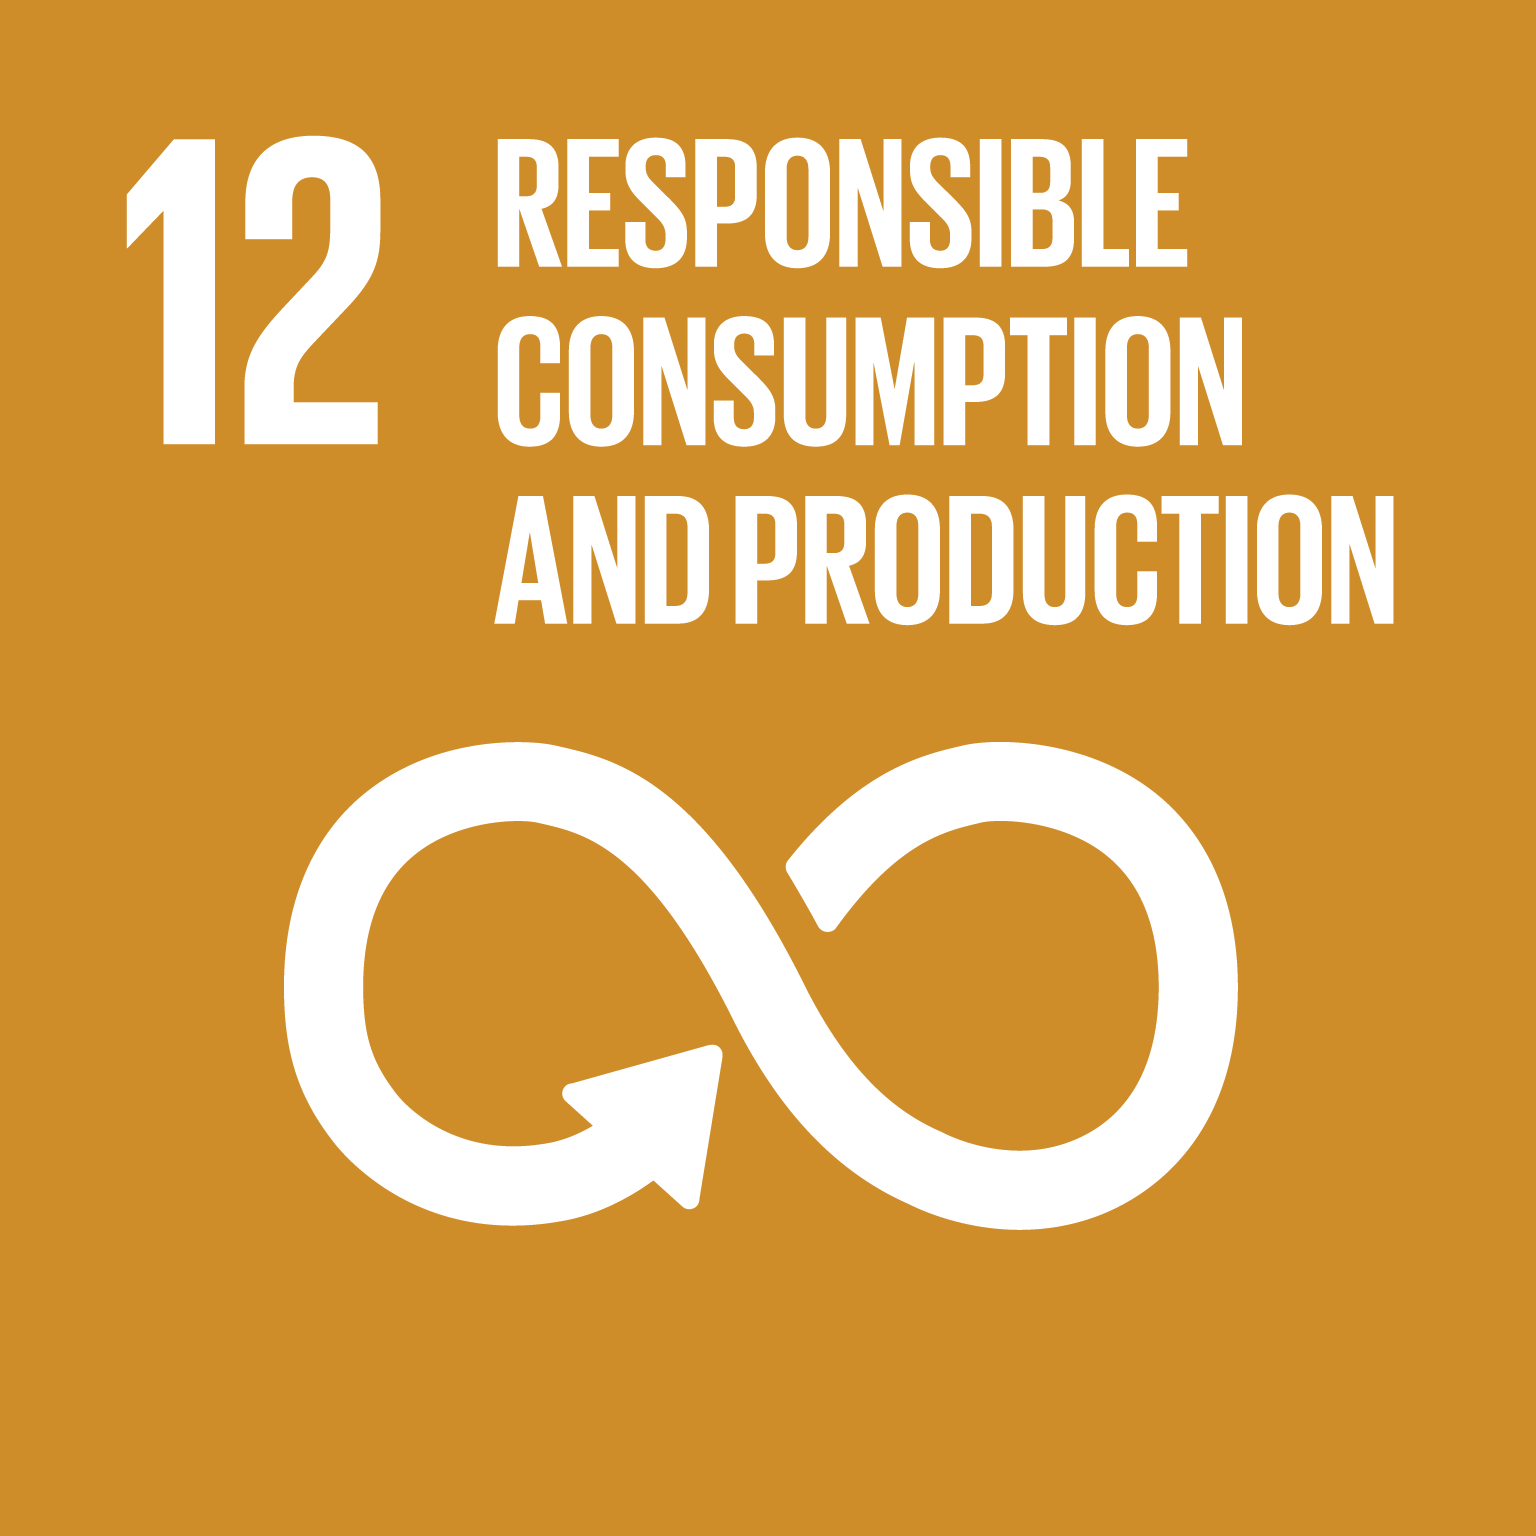 Goal 12: Responsible Consumption, the text of this infographic is listed below